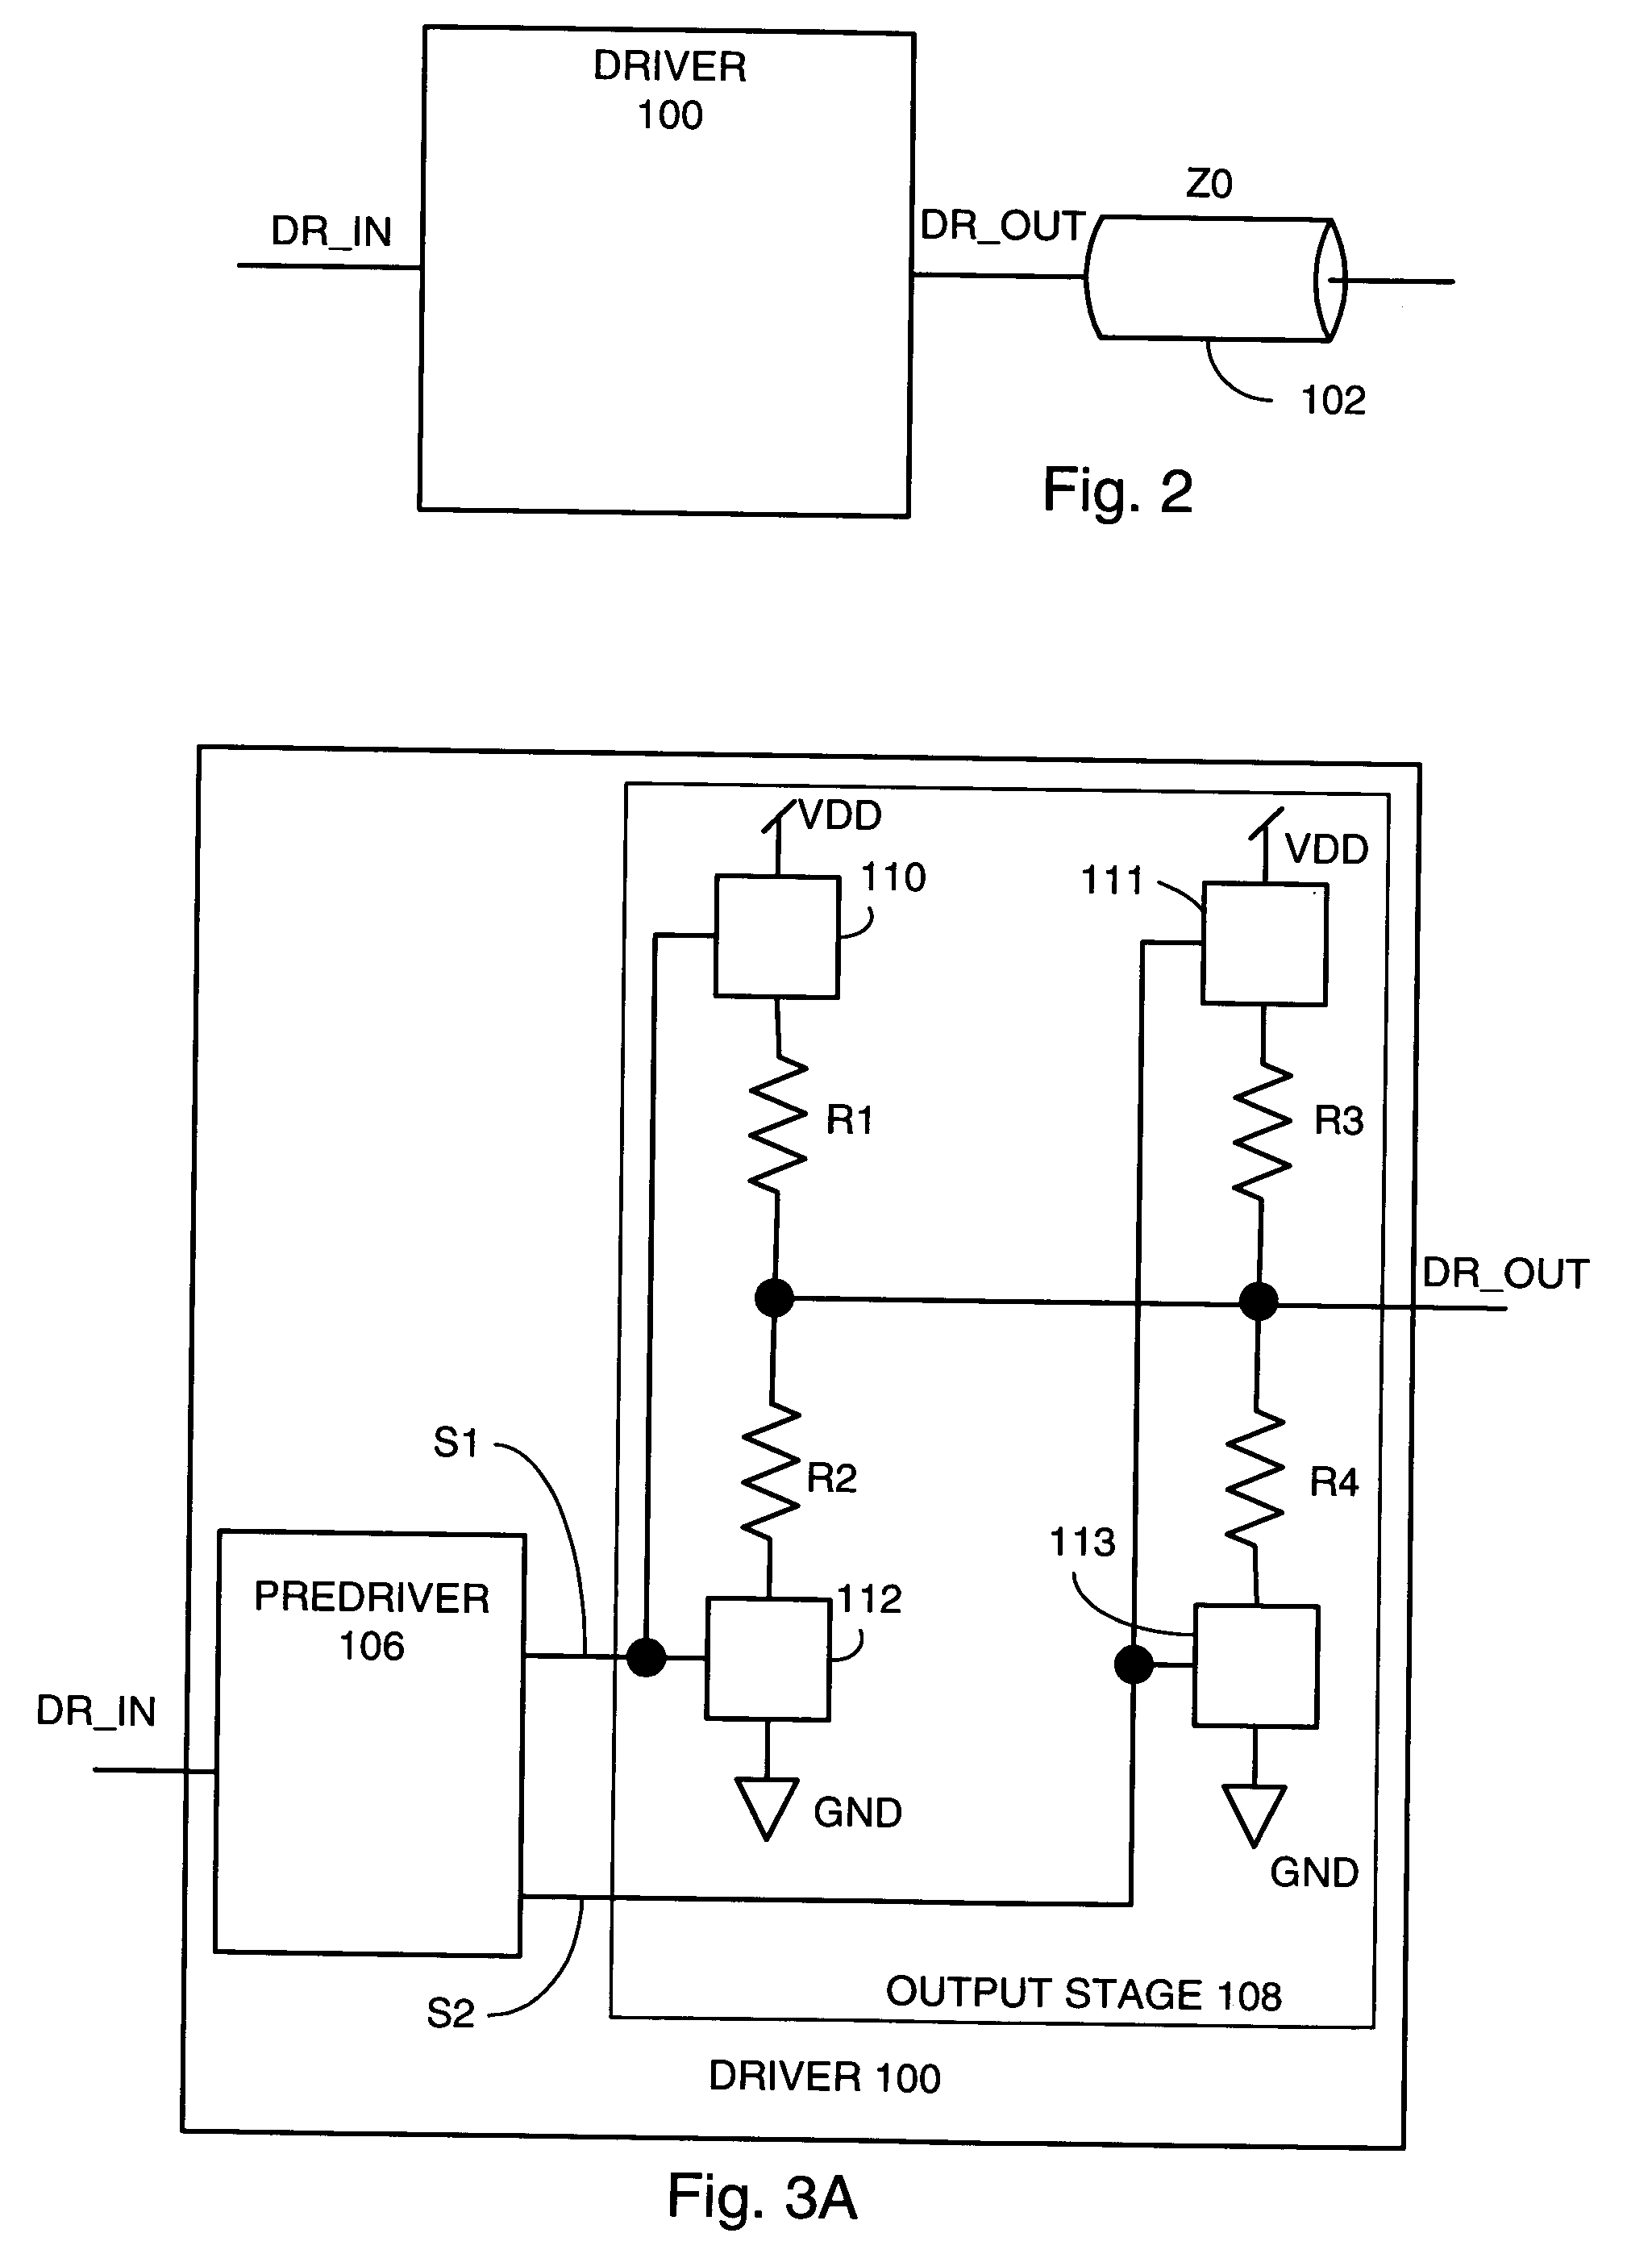 Precompensated driver with constant impedance